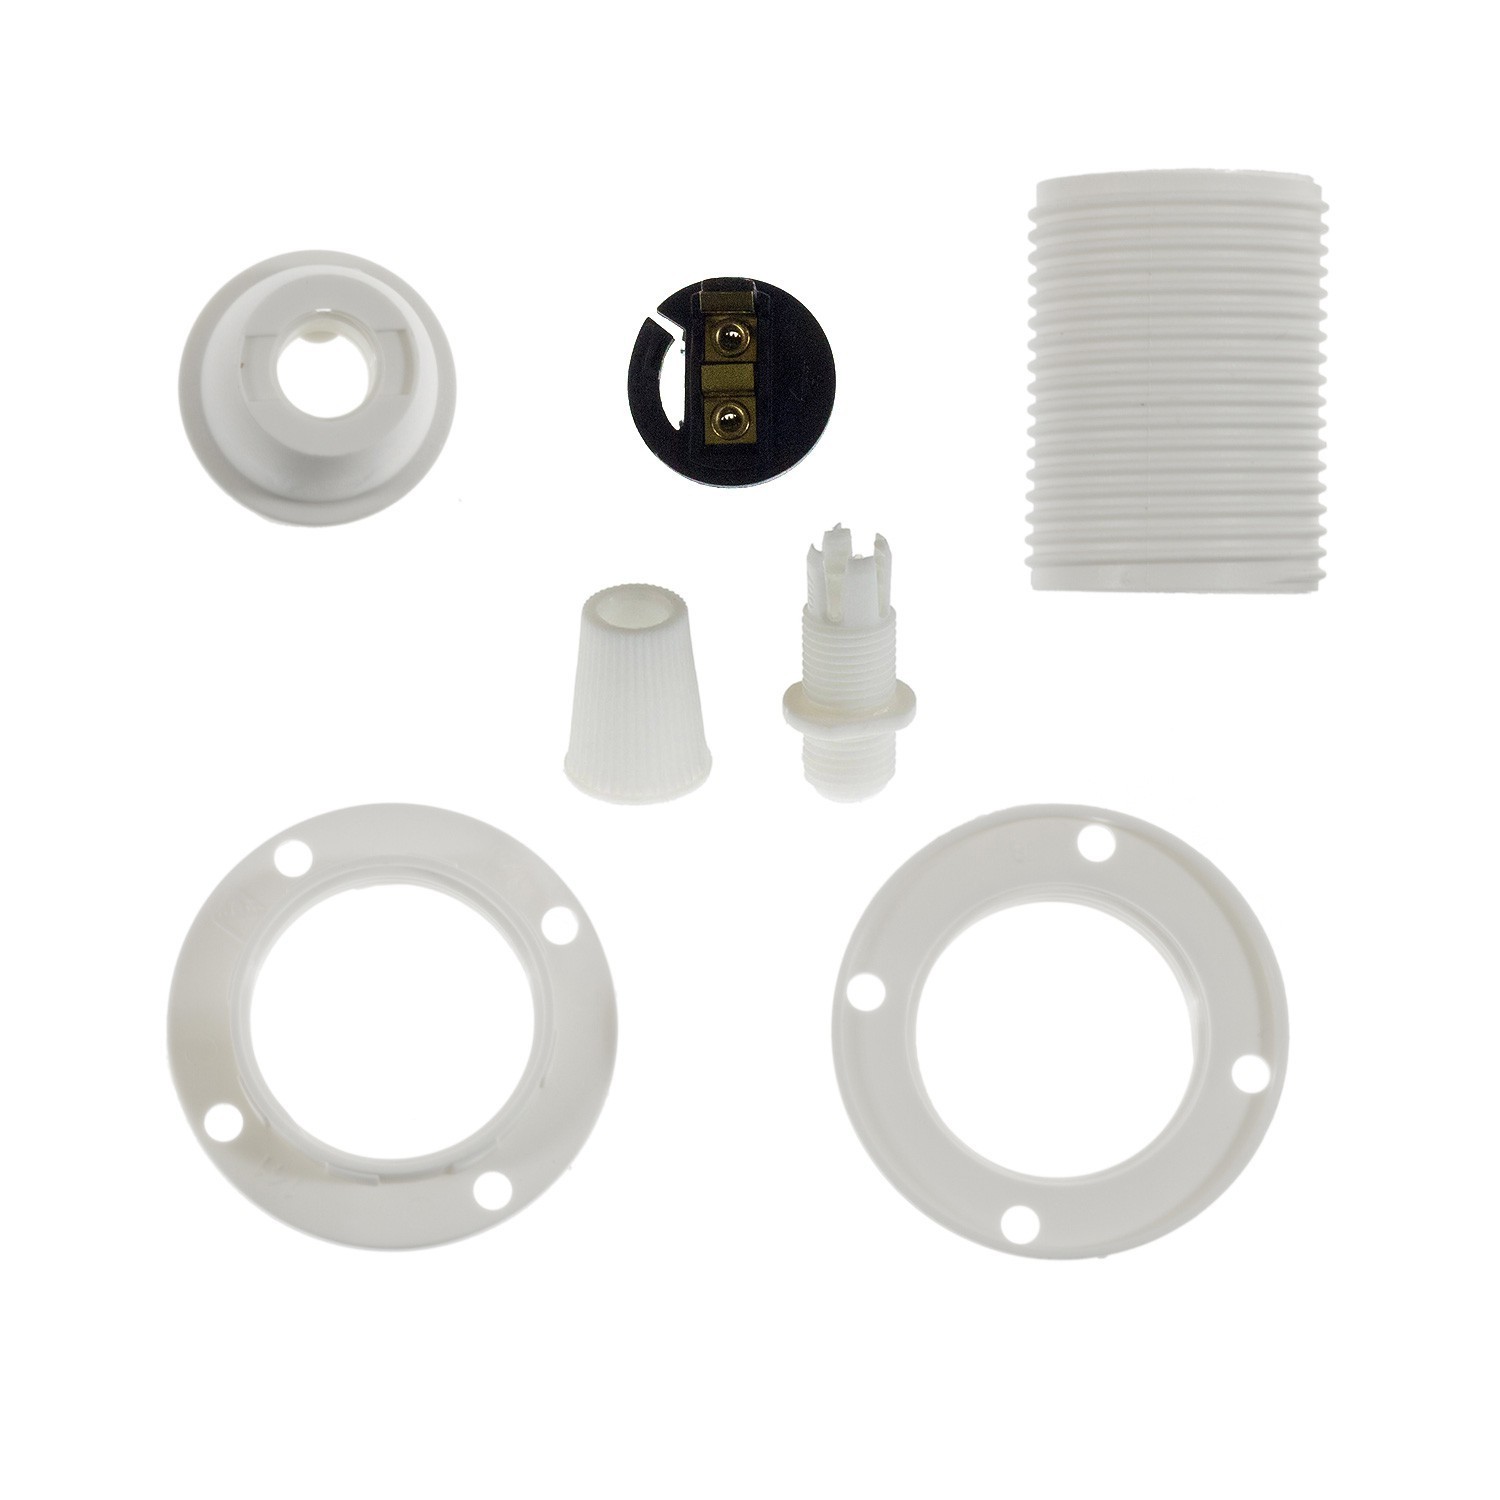 Double ferrule thermoplastic E14 lamp holder kit for lampshade